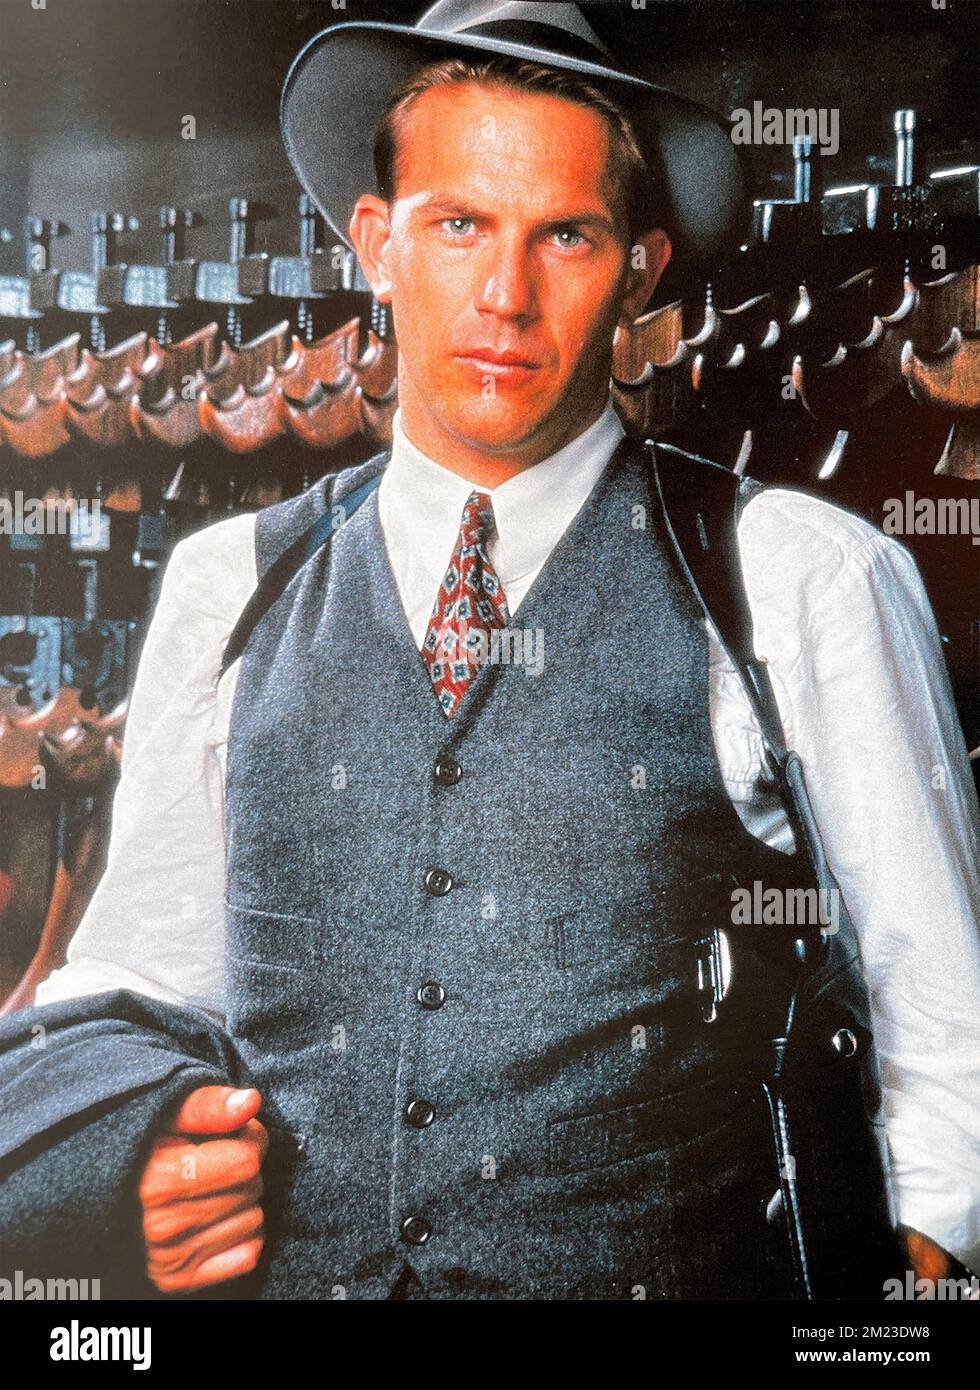 THE UNTOUCHABLES 1987 Paramount Picturs Film mit Kevin Costner als Eliot Ness Stockfoto